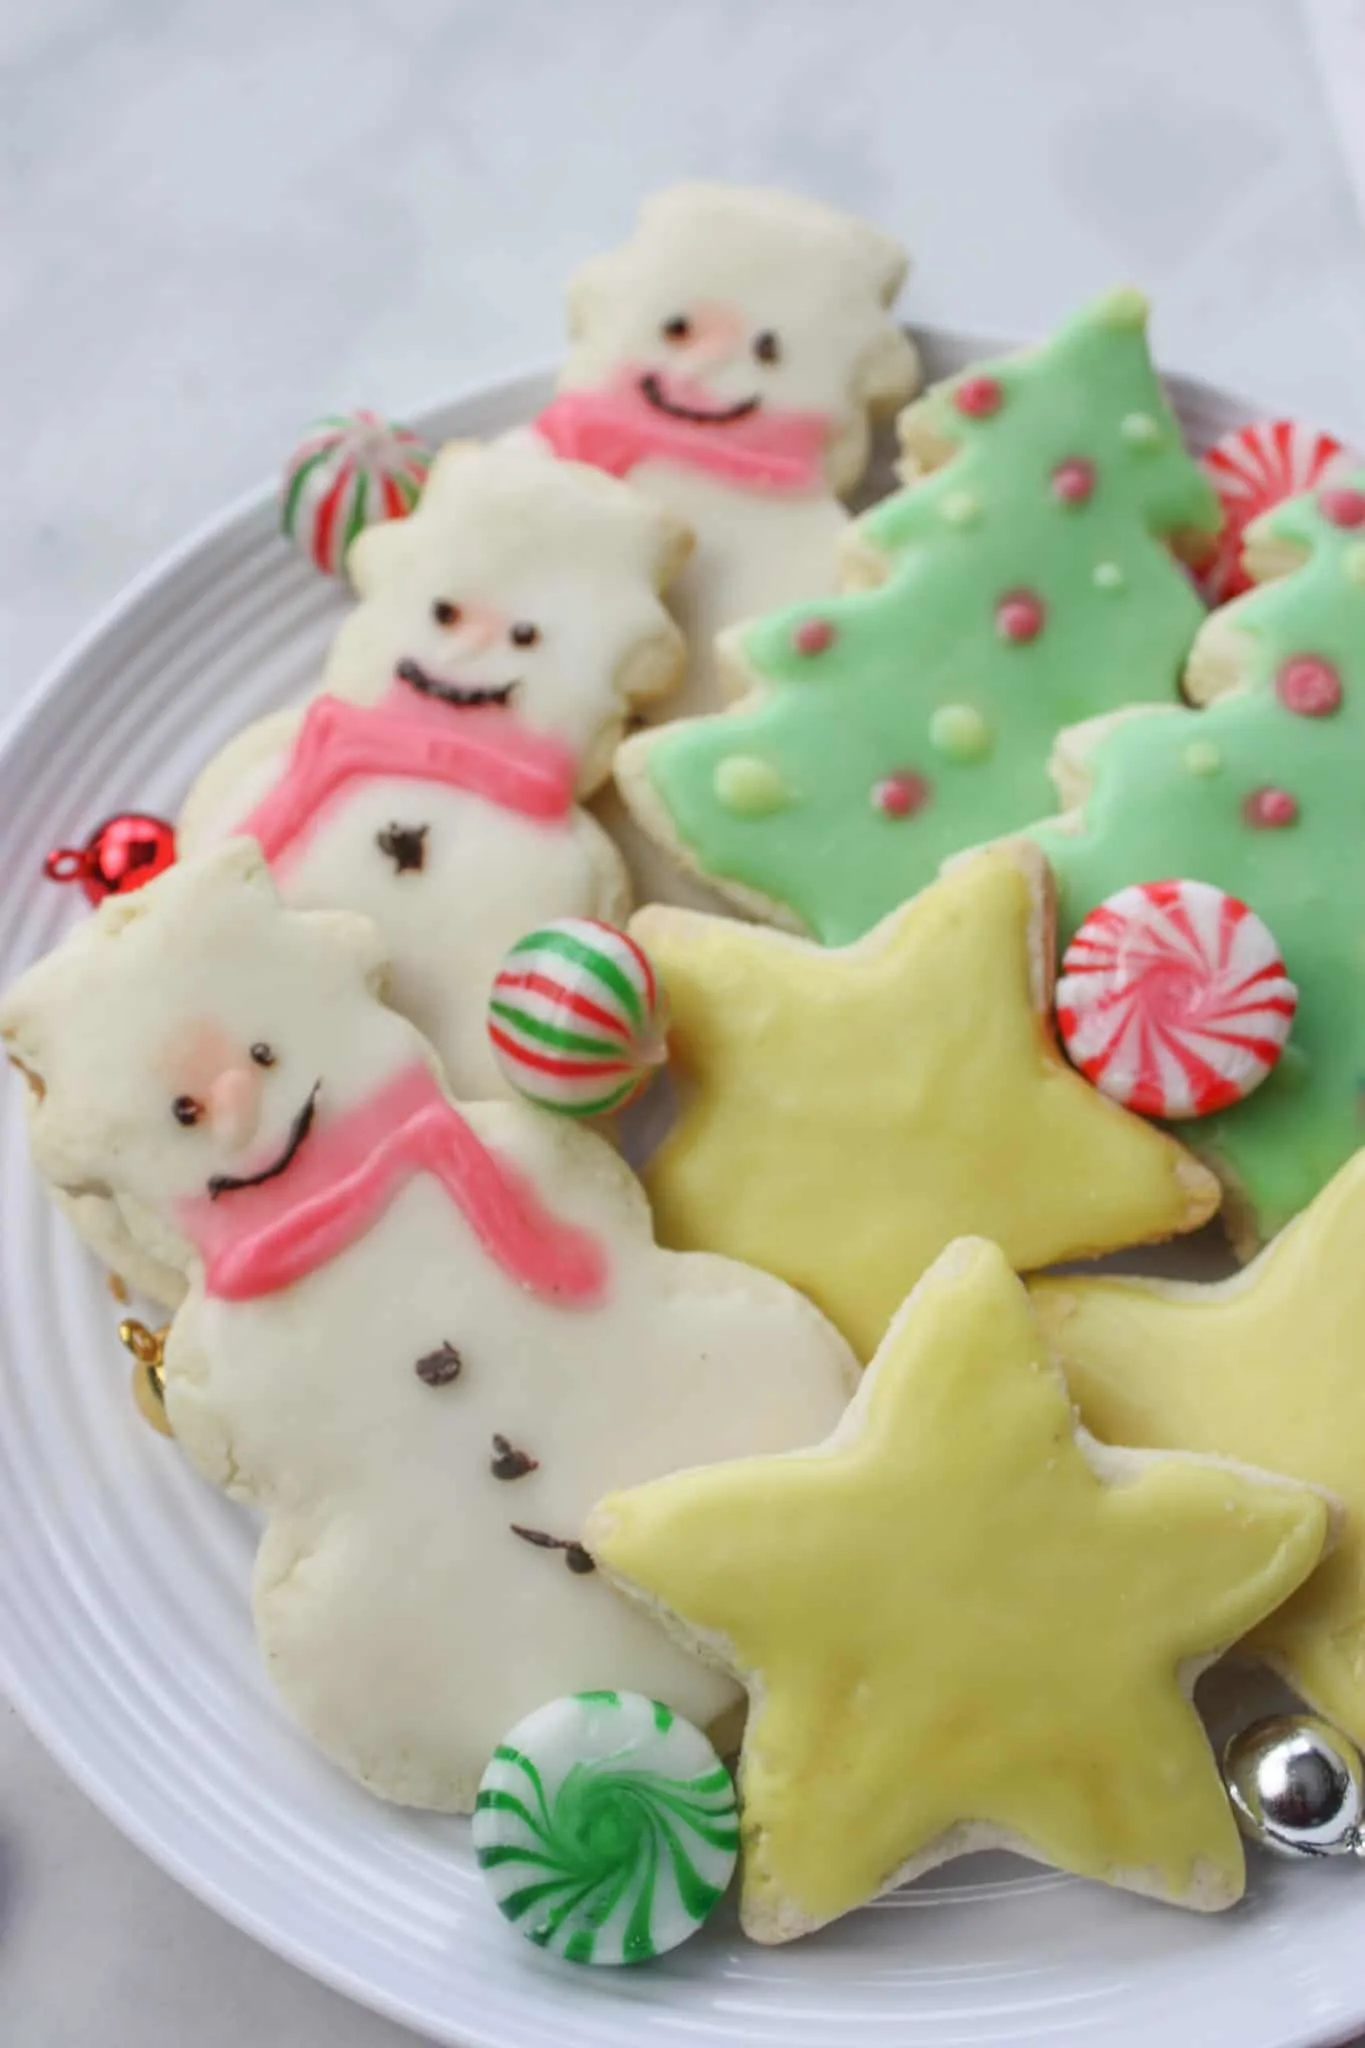 Here are the best Gluten Free Sugar Cookies I have ever made!  They will be my new go to recipe, whether I decorate them for each holiday or leave them plain for dunking!